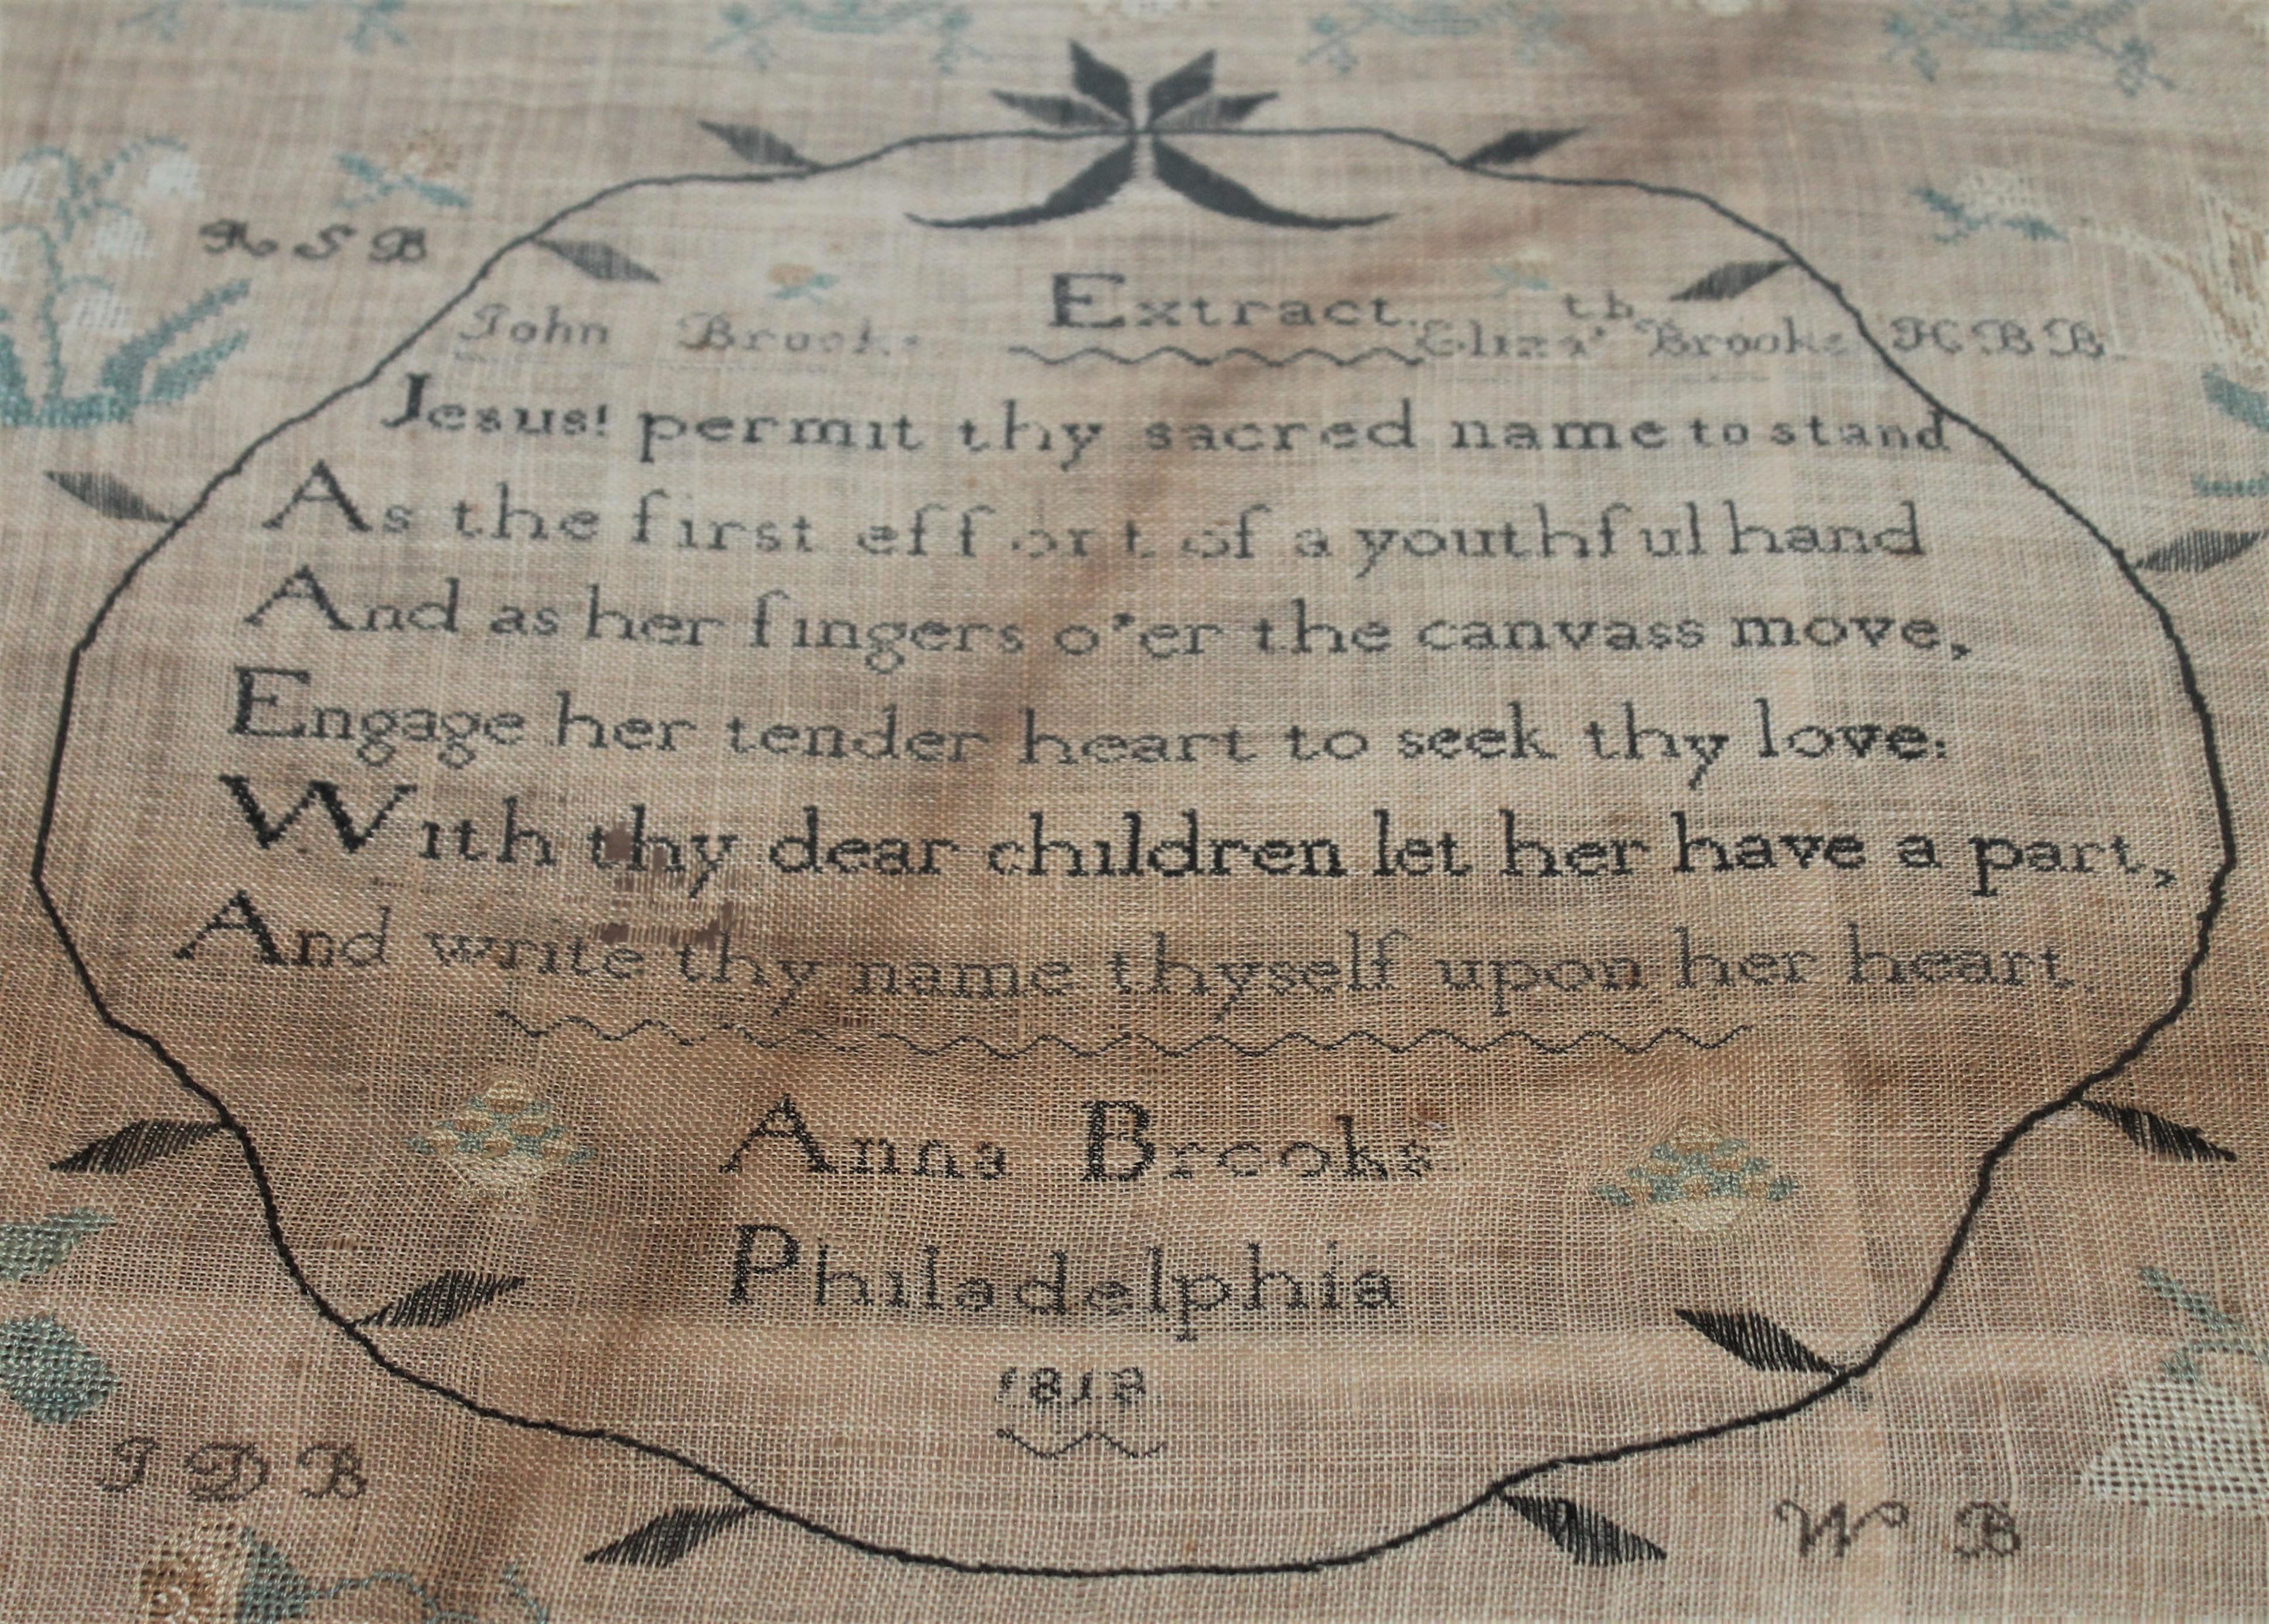 Early 19th century linen sampler dated 1818 made by Anna Brooks in PA. The initial on the sides of the Extract are of the Family From Grandparents on the left of the Extract to the siblings on the right of the Extract. There is a handmade blueprint